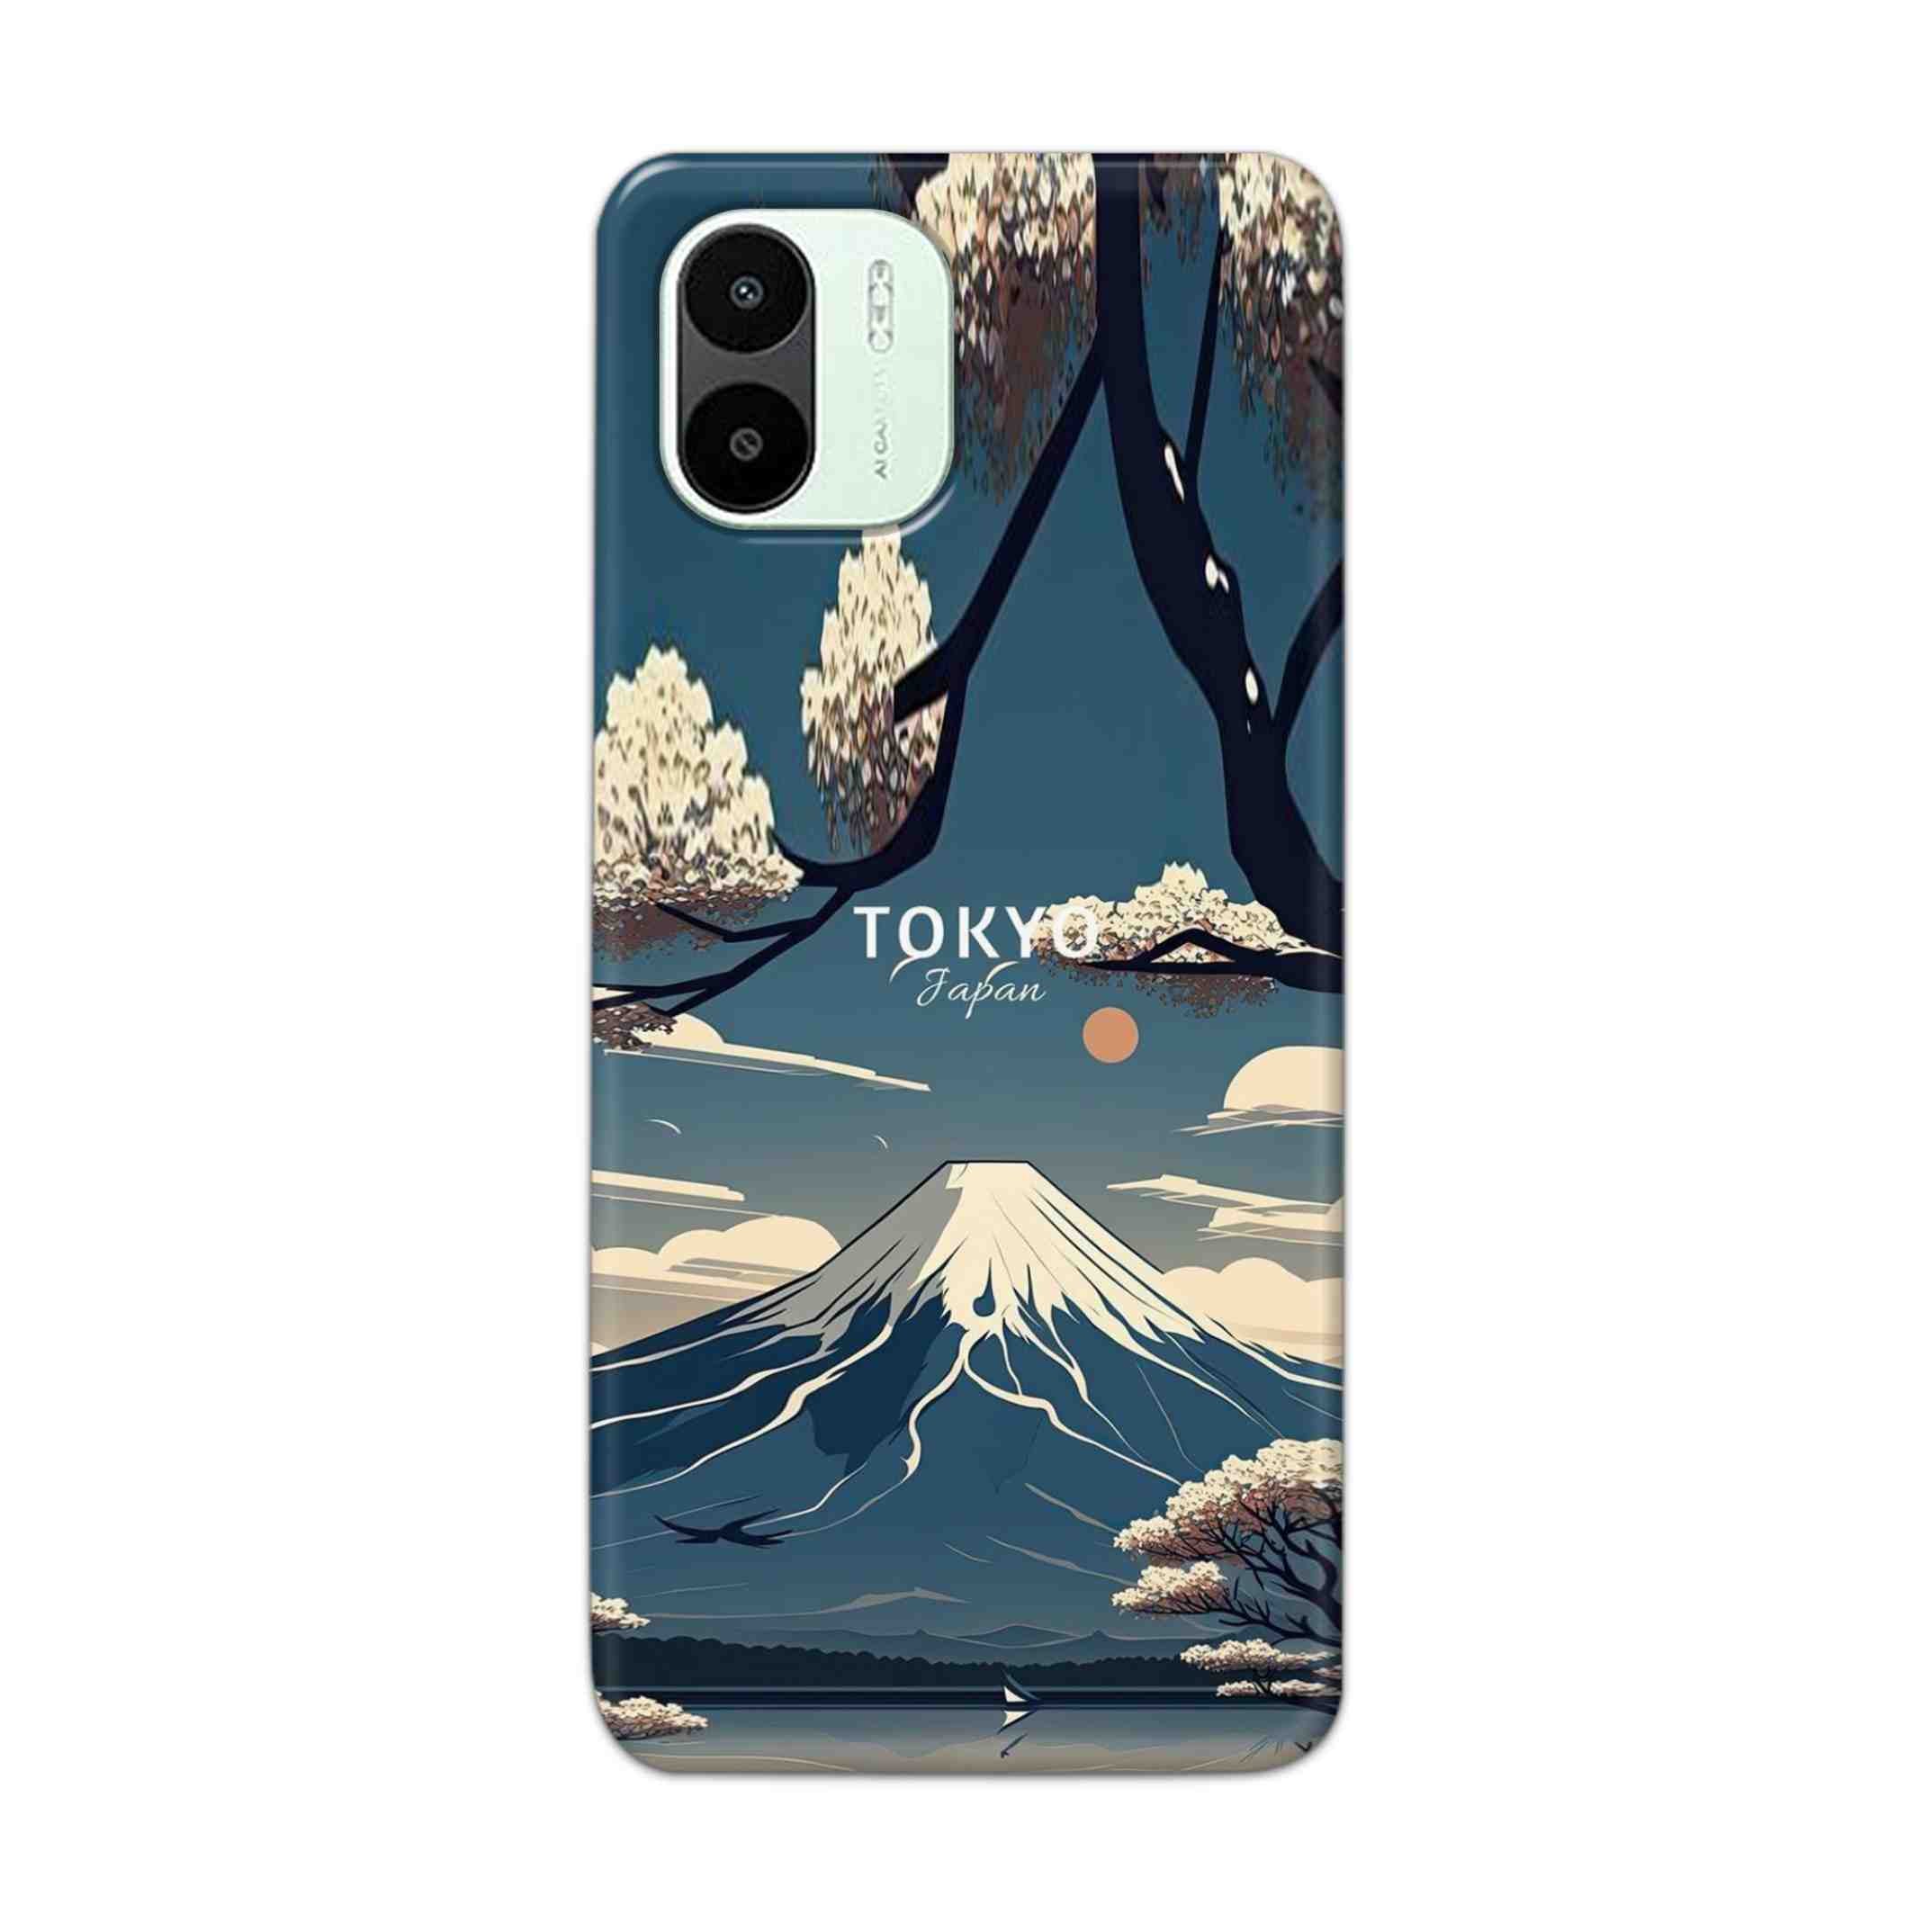 Buy Tokyo Hard Back Mobile Phone Case Cover For Xiaomi Redmi A1 5G Online